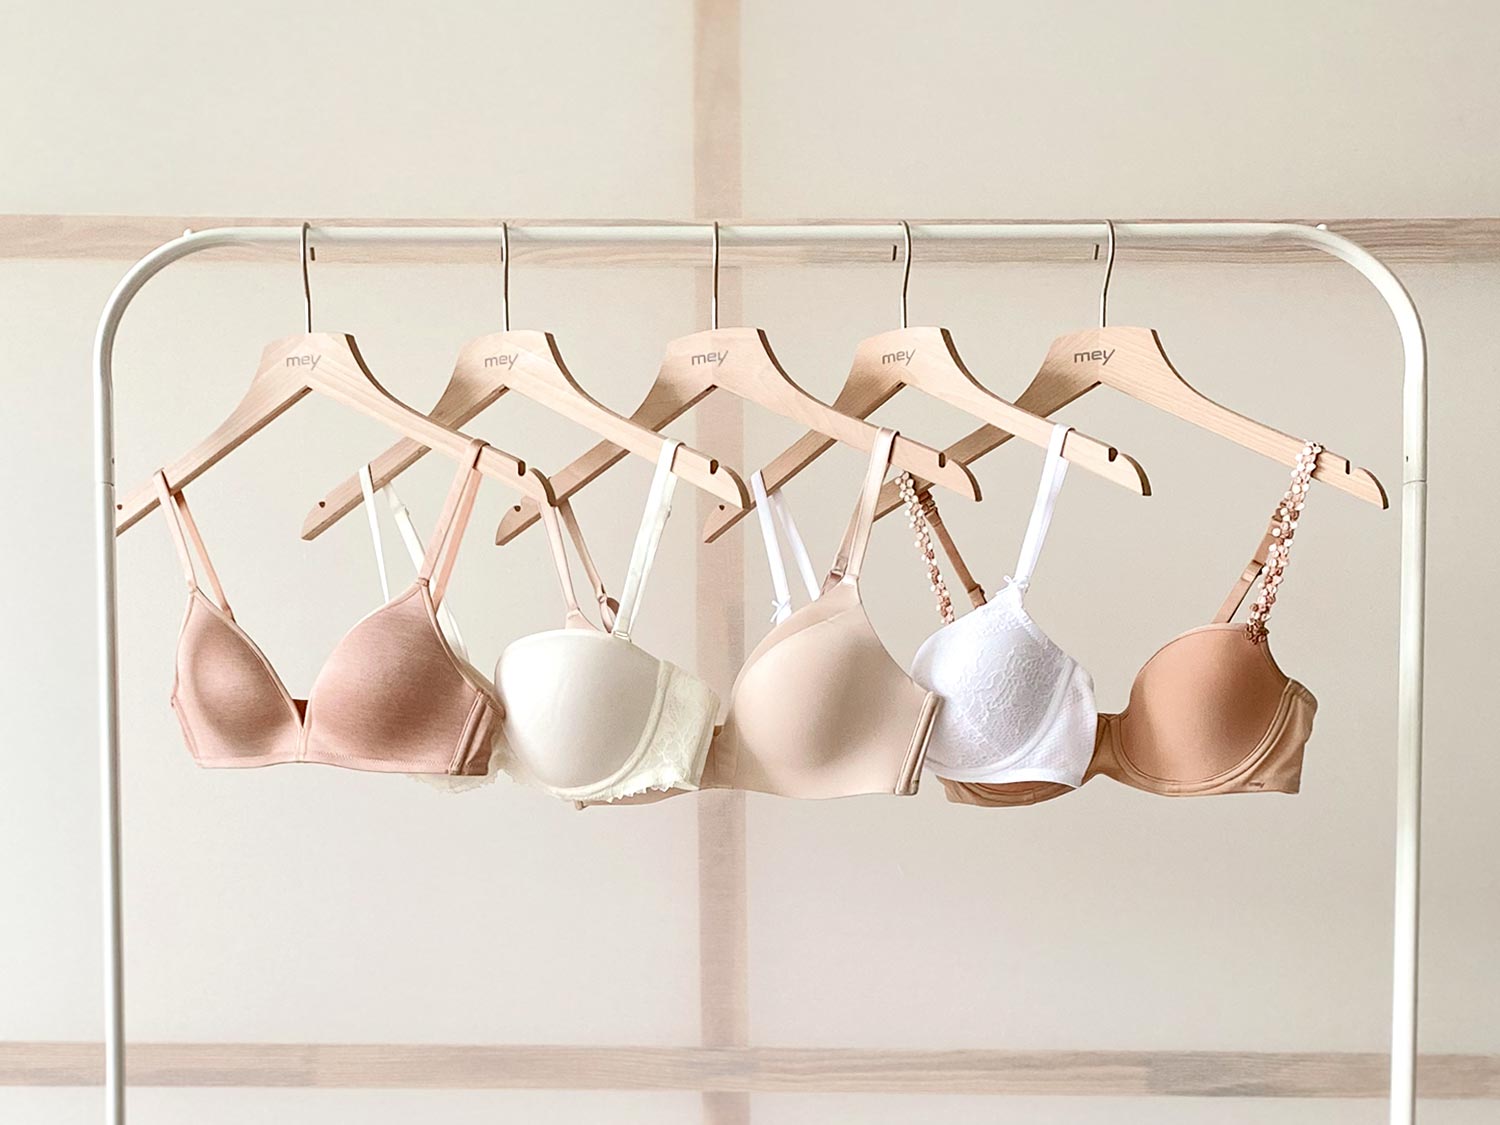 The 5 most important bras suitable for any outfit | mey®